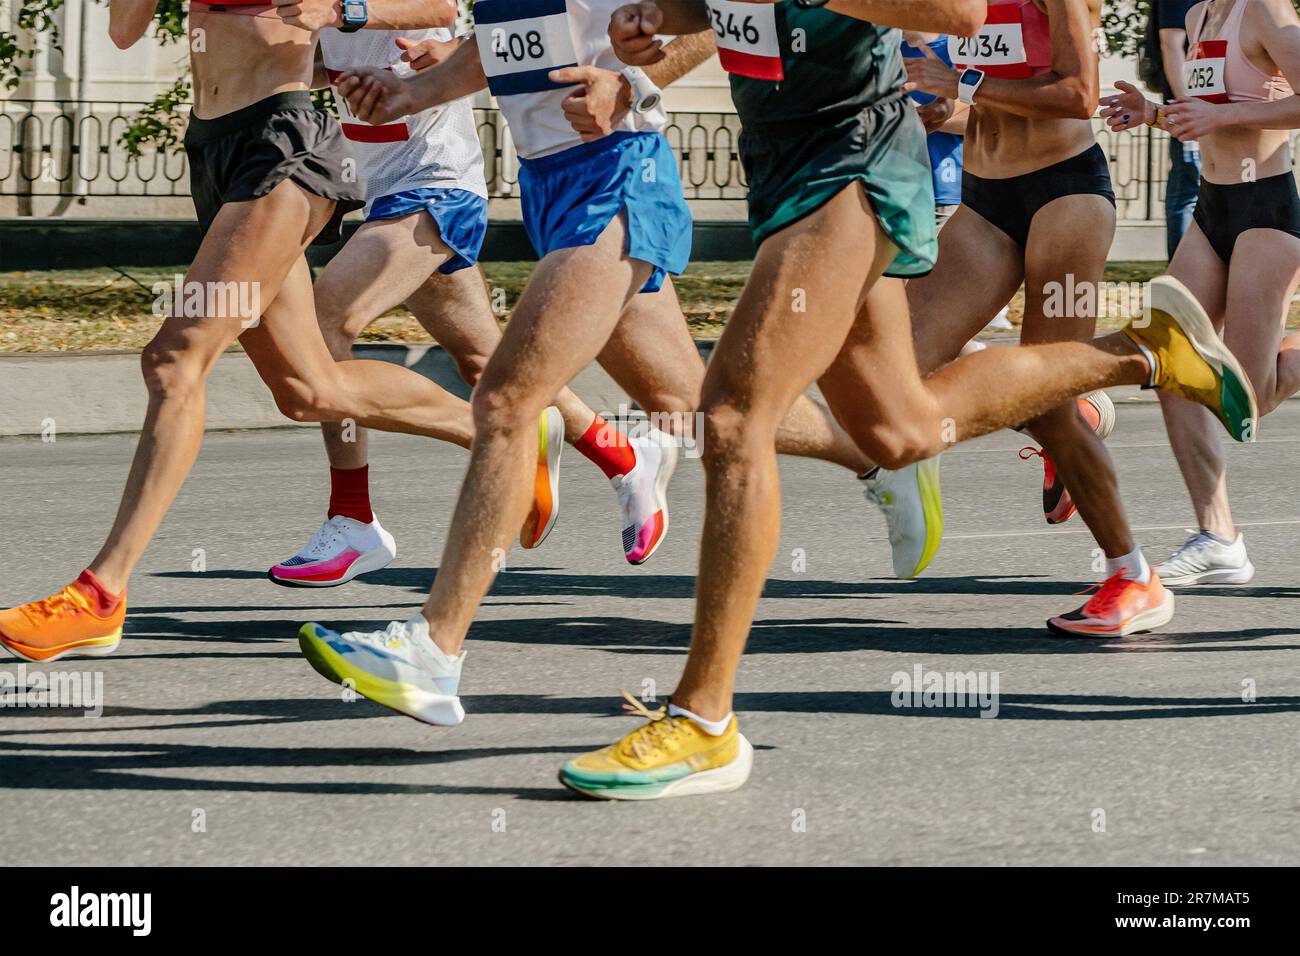 legs runners athletes women and men running city marathon, group sportive joggers run together Stock Photo